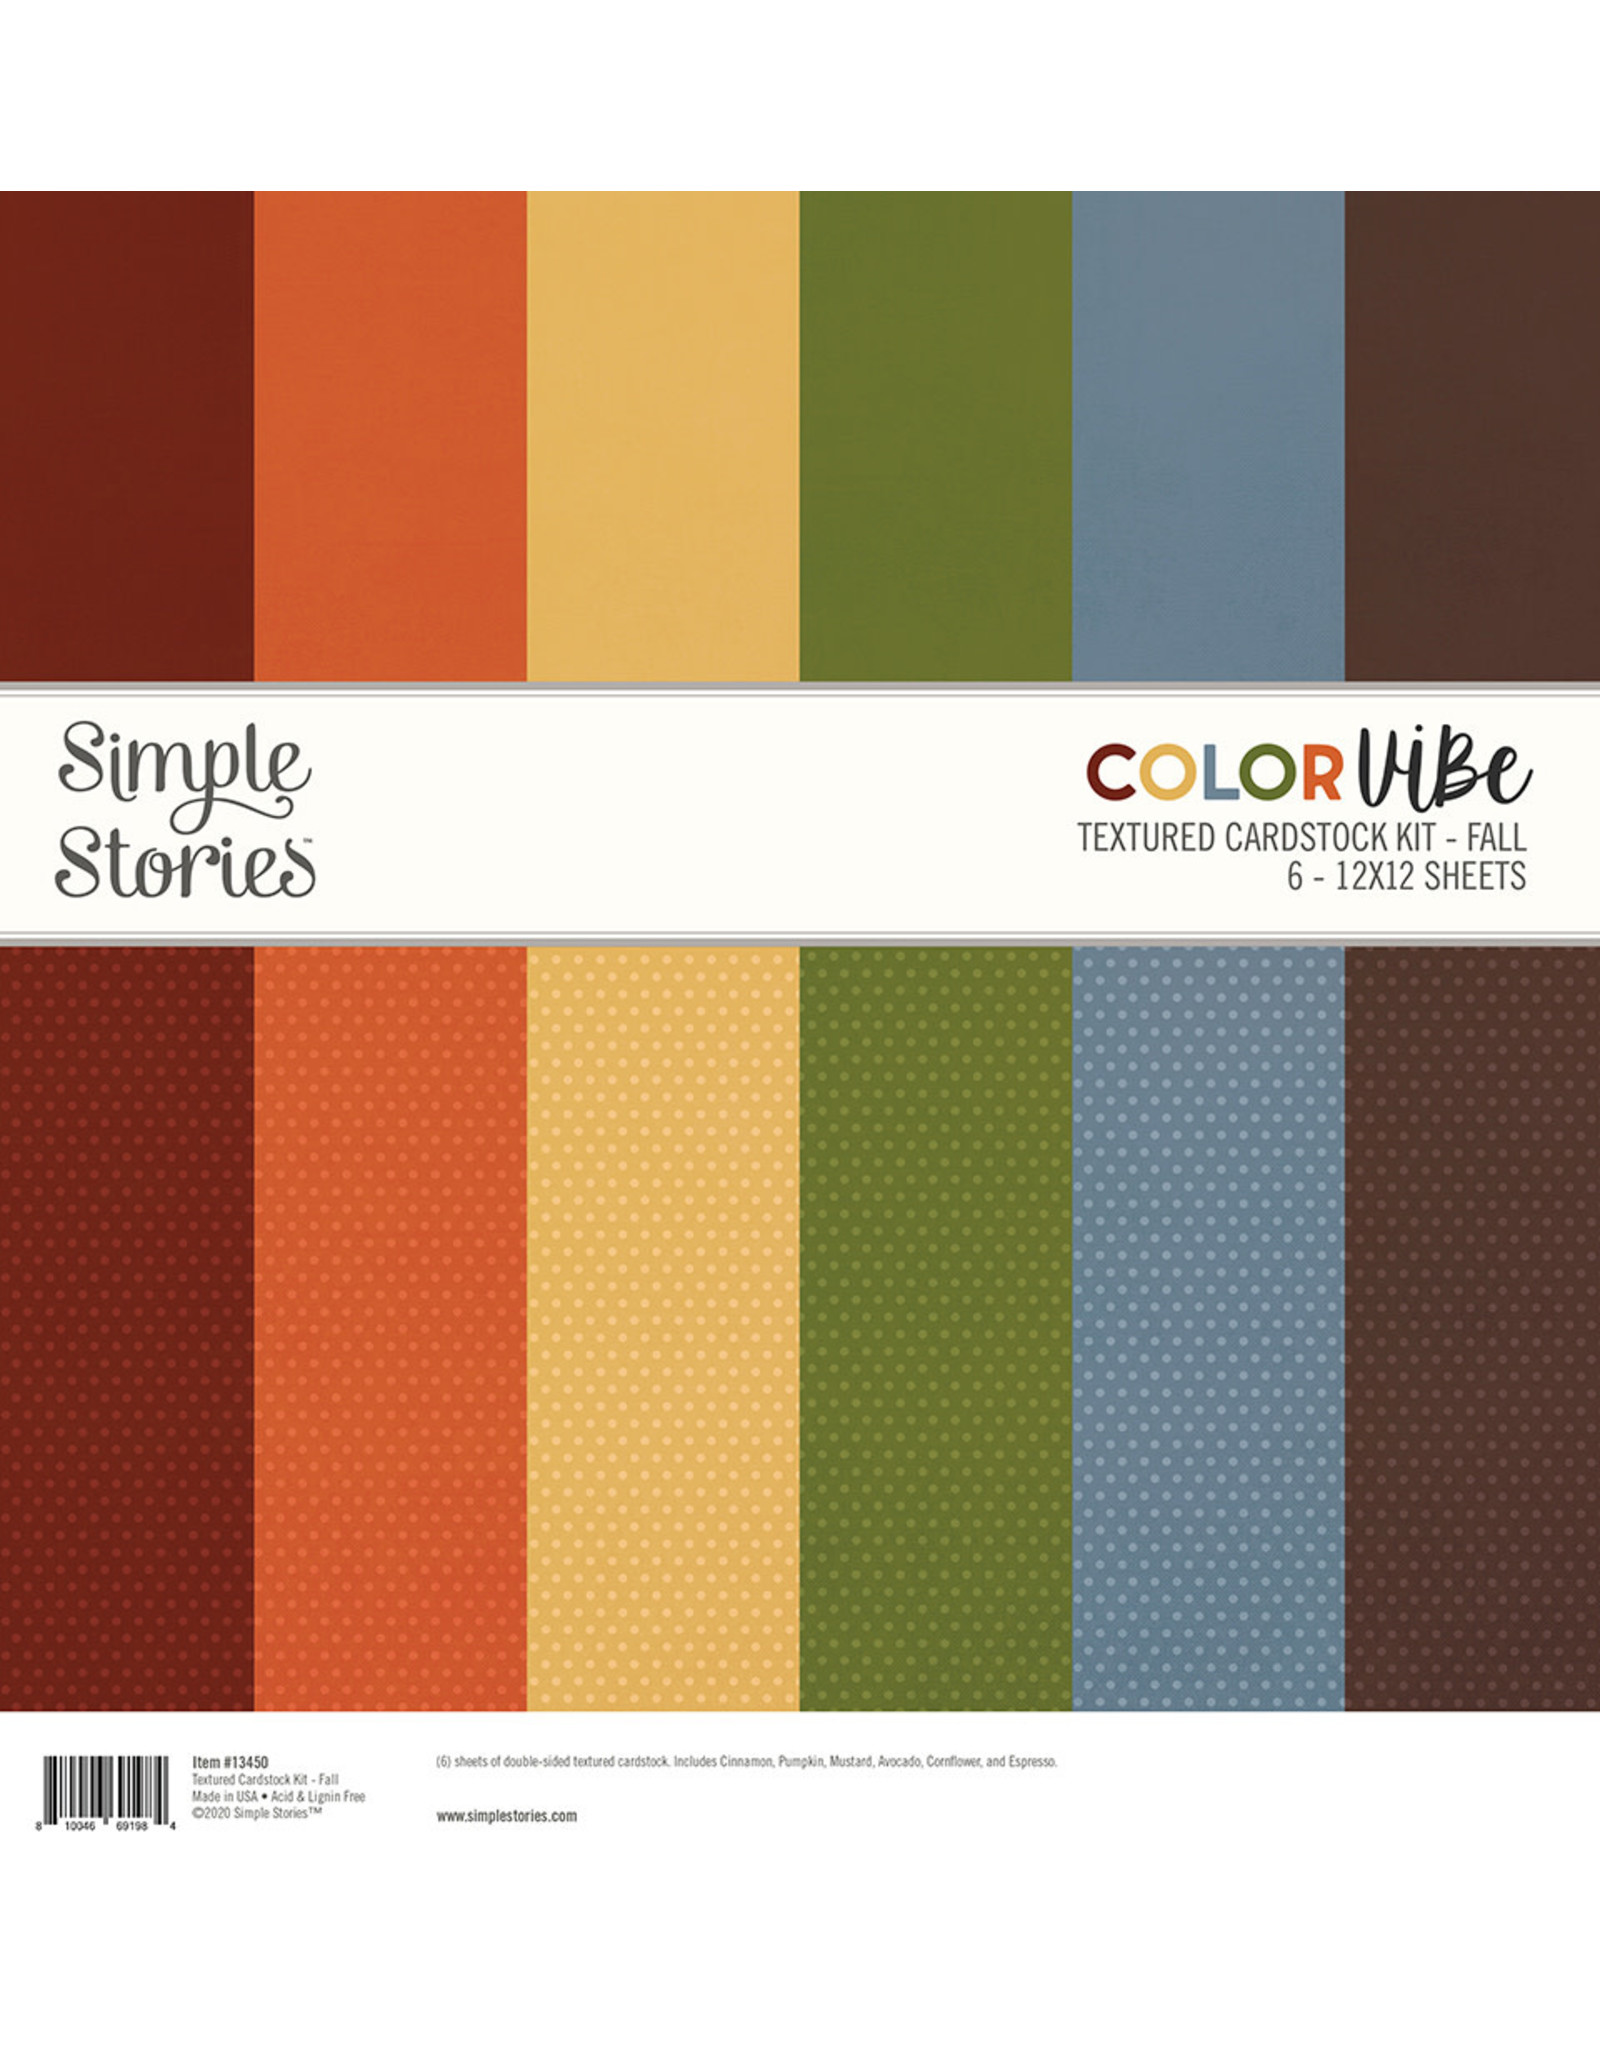 Simple Stories Color Vibe Textured Cardstock Kit -  Fall